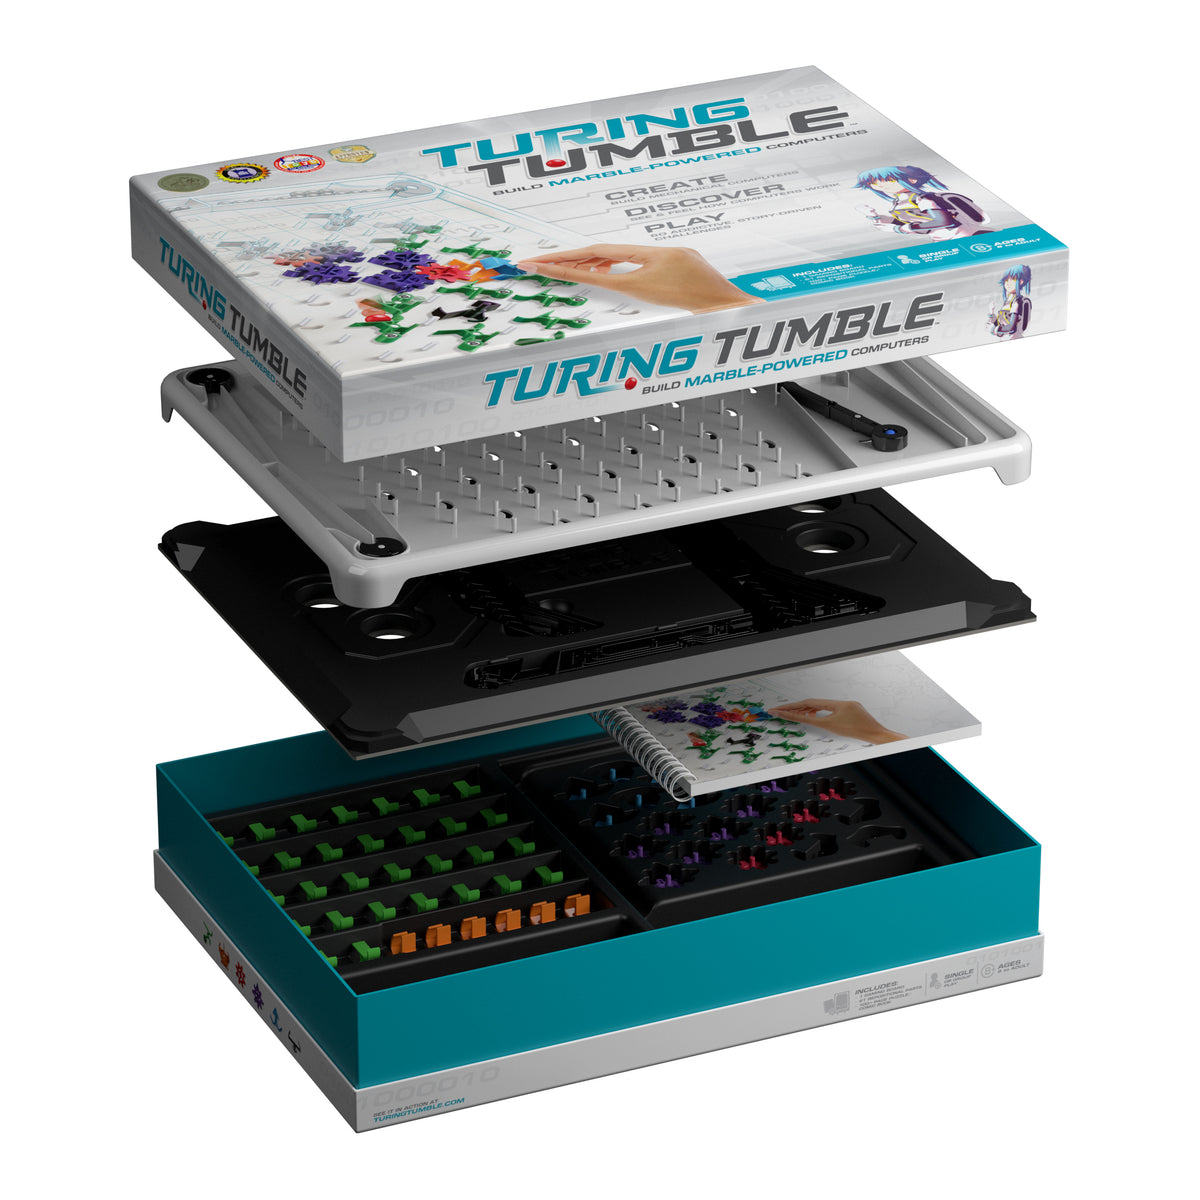 Turing Tumble Marble Reloader – Upper Story